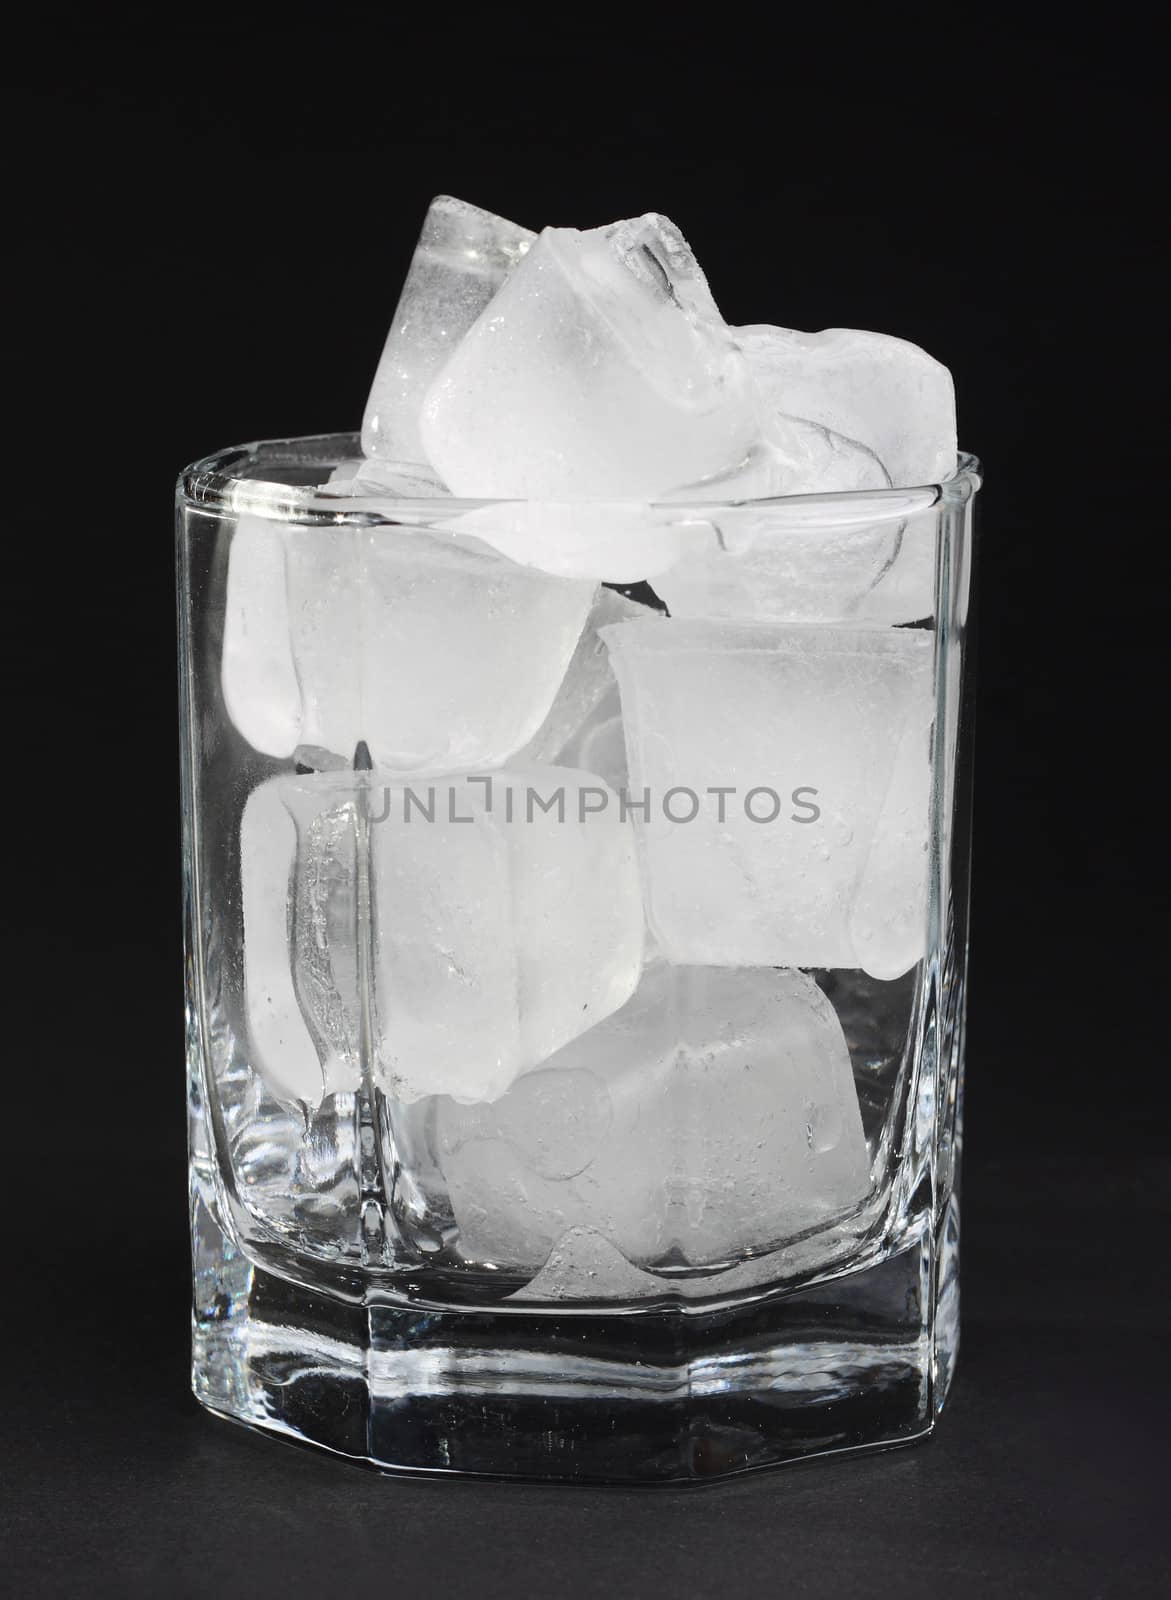 Sone cubes of ice inside a glass